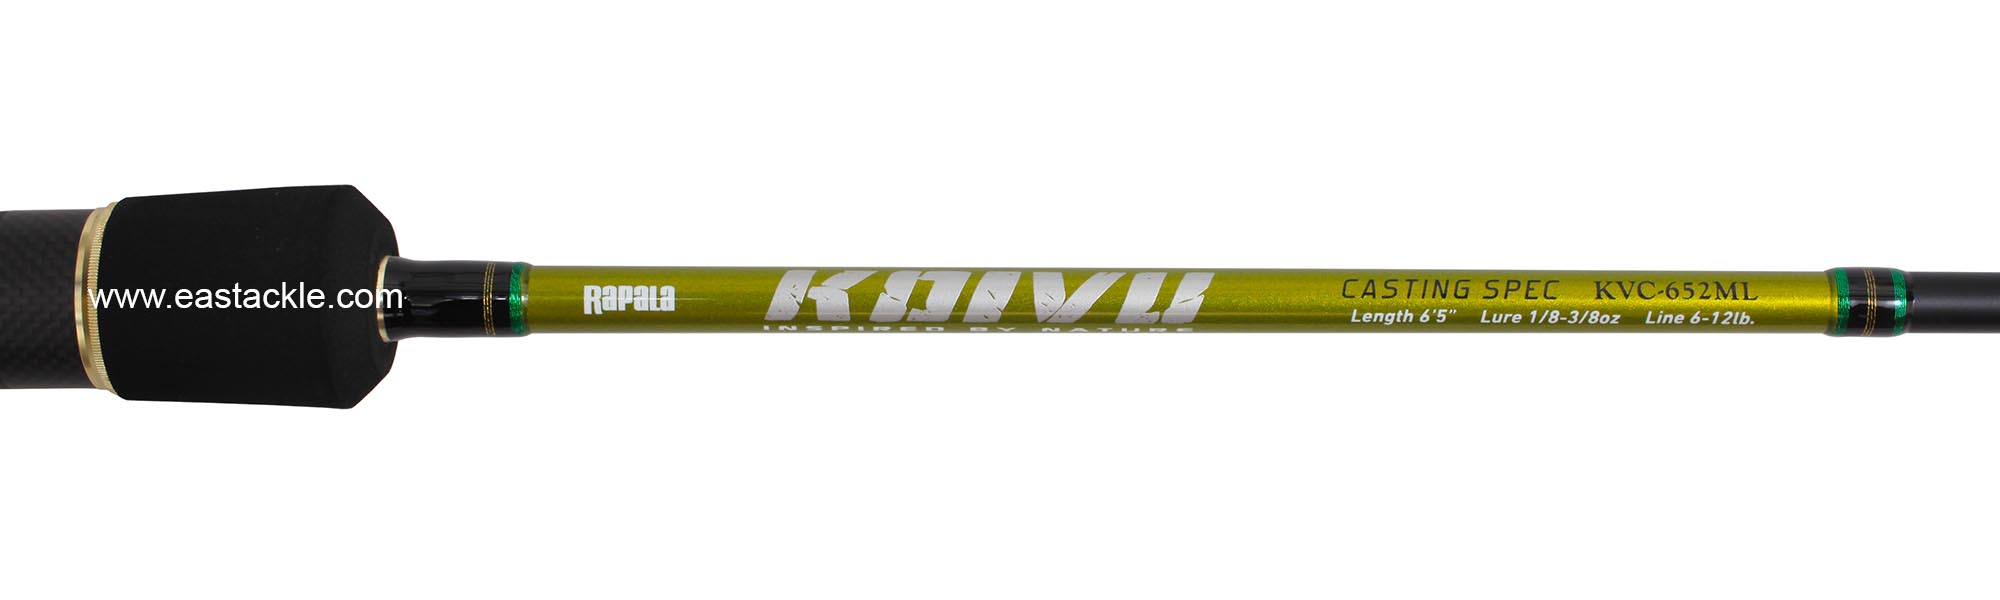 Rapala - Koivu - KVC652ML - Bait Casting Rod - Blank Specifications (Top View) | Eastackle